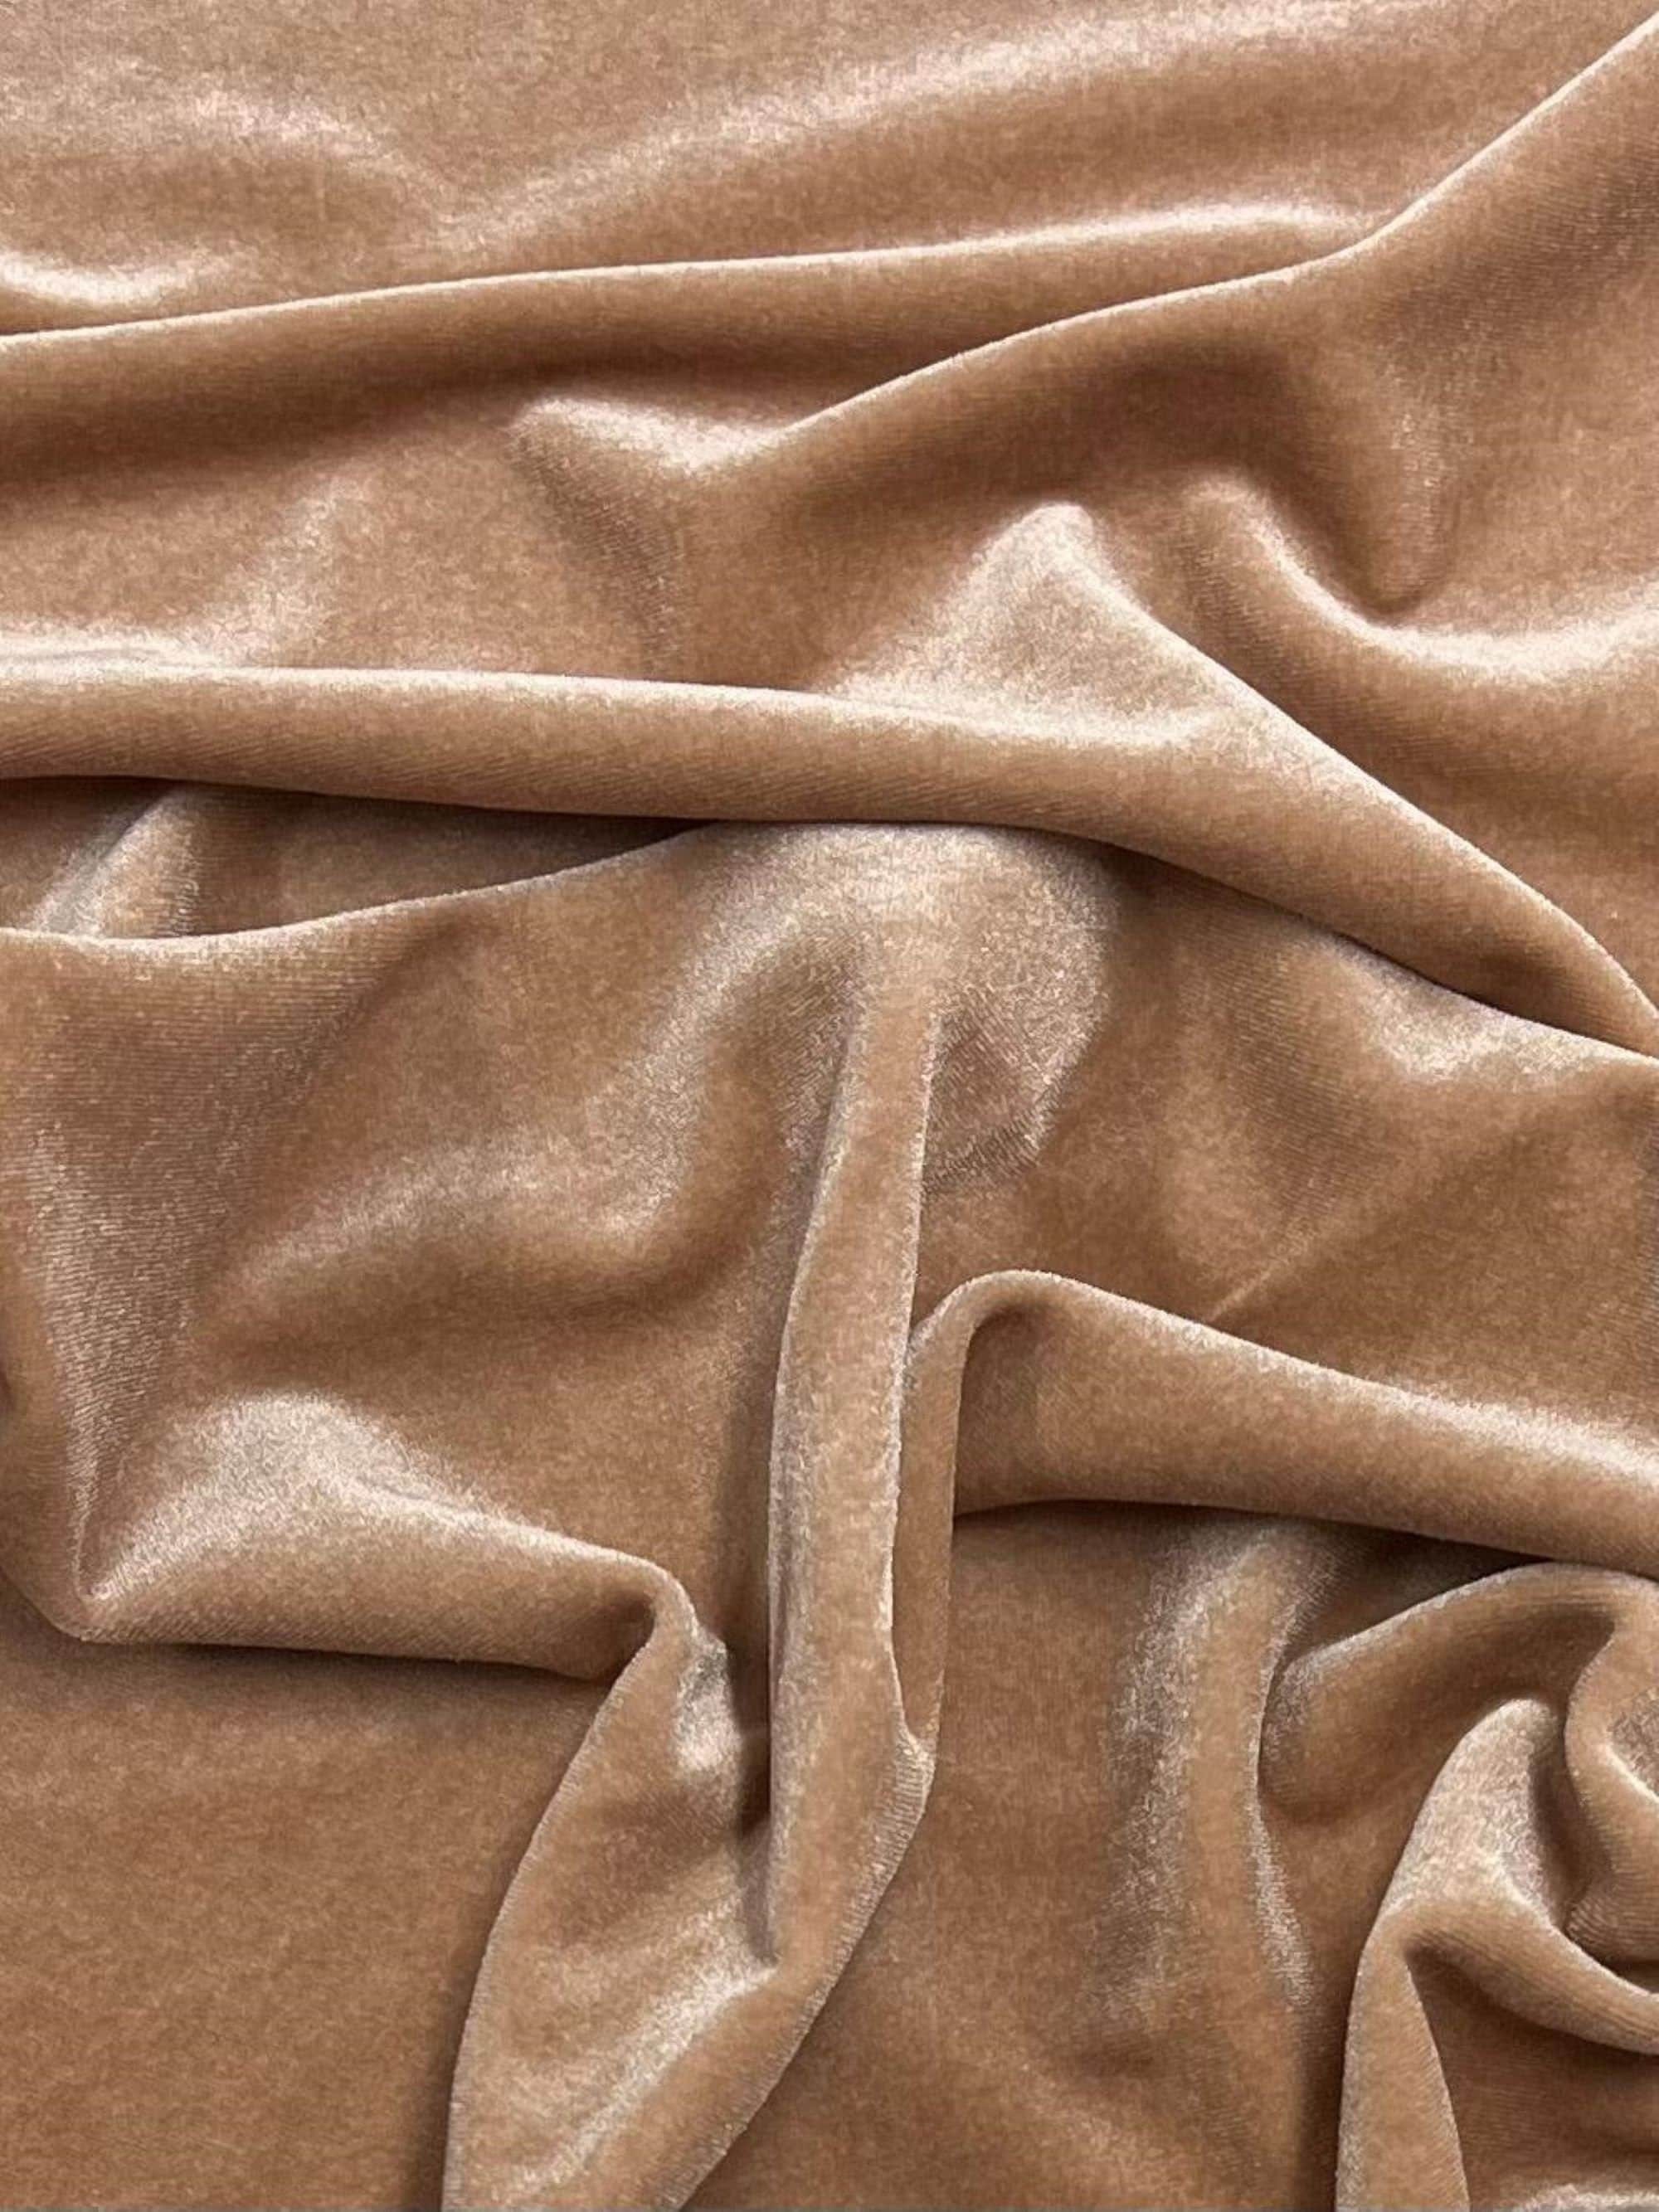 Dusty Pink Stretchy Velvet Fabric by the Yard Stretch Fabrics Polyester  Spandex for Scrunchies Clothes Costumes Crafts Bows 